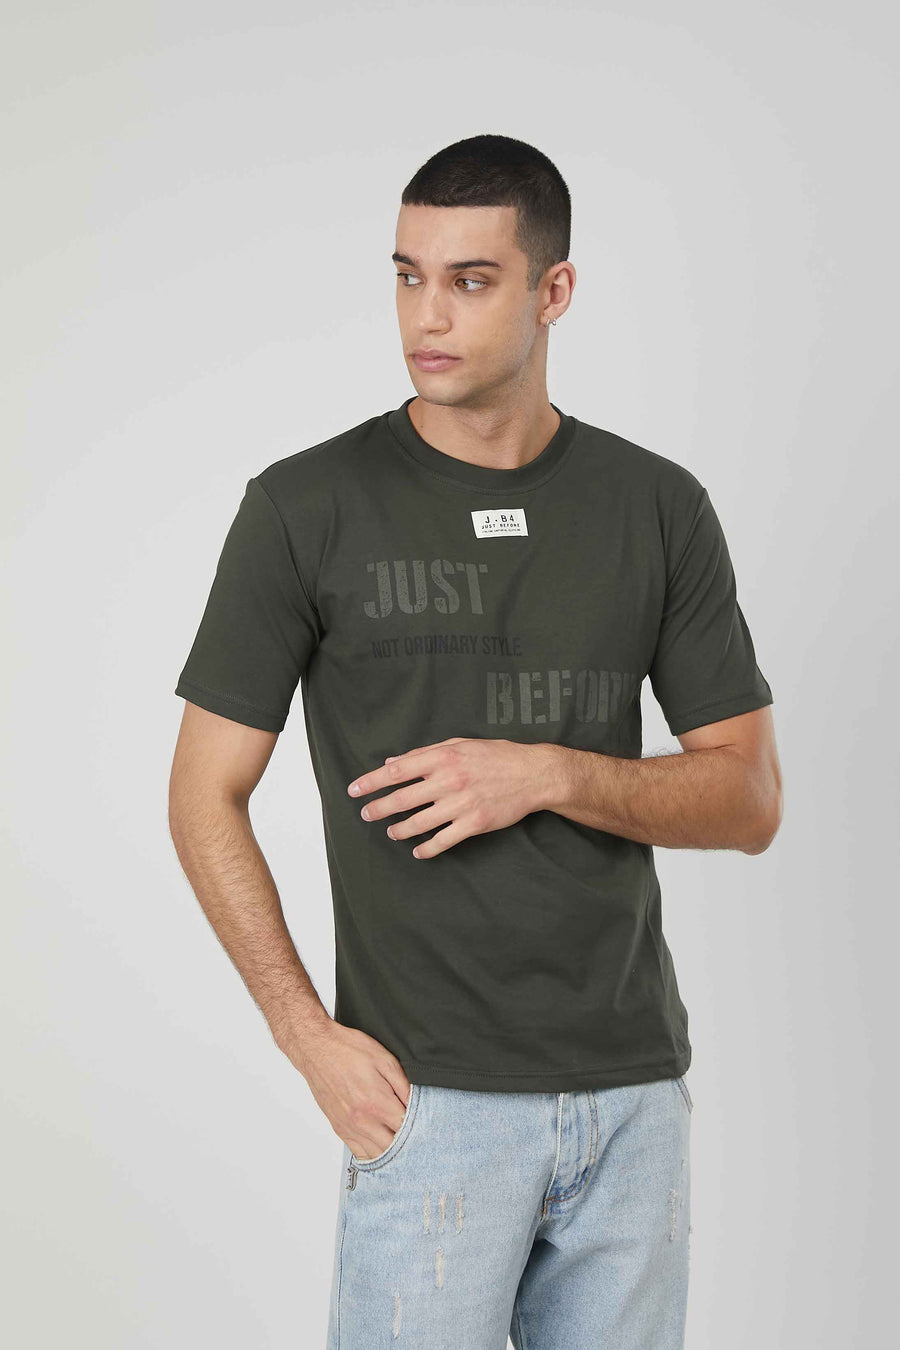 T-SHIRT STAMPA MILITARY STYLE